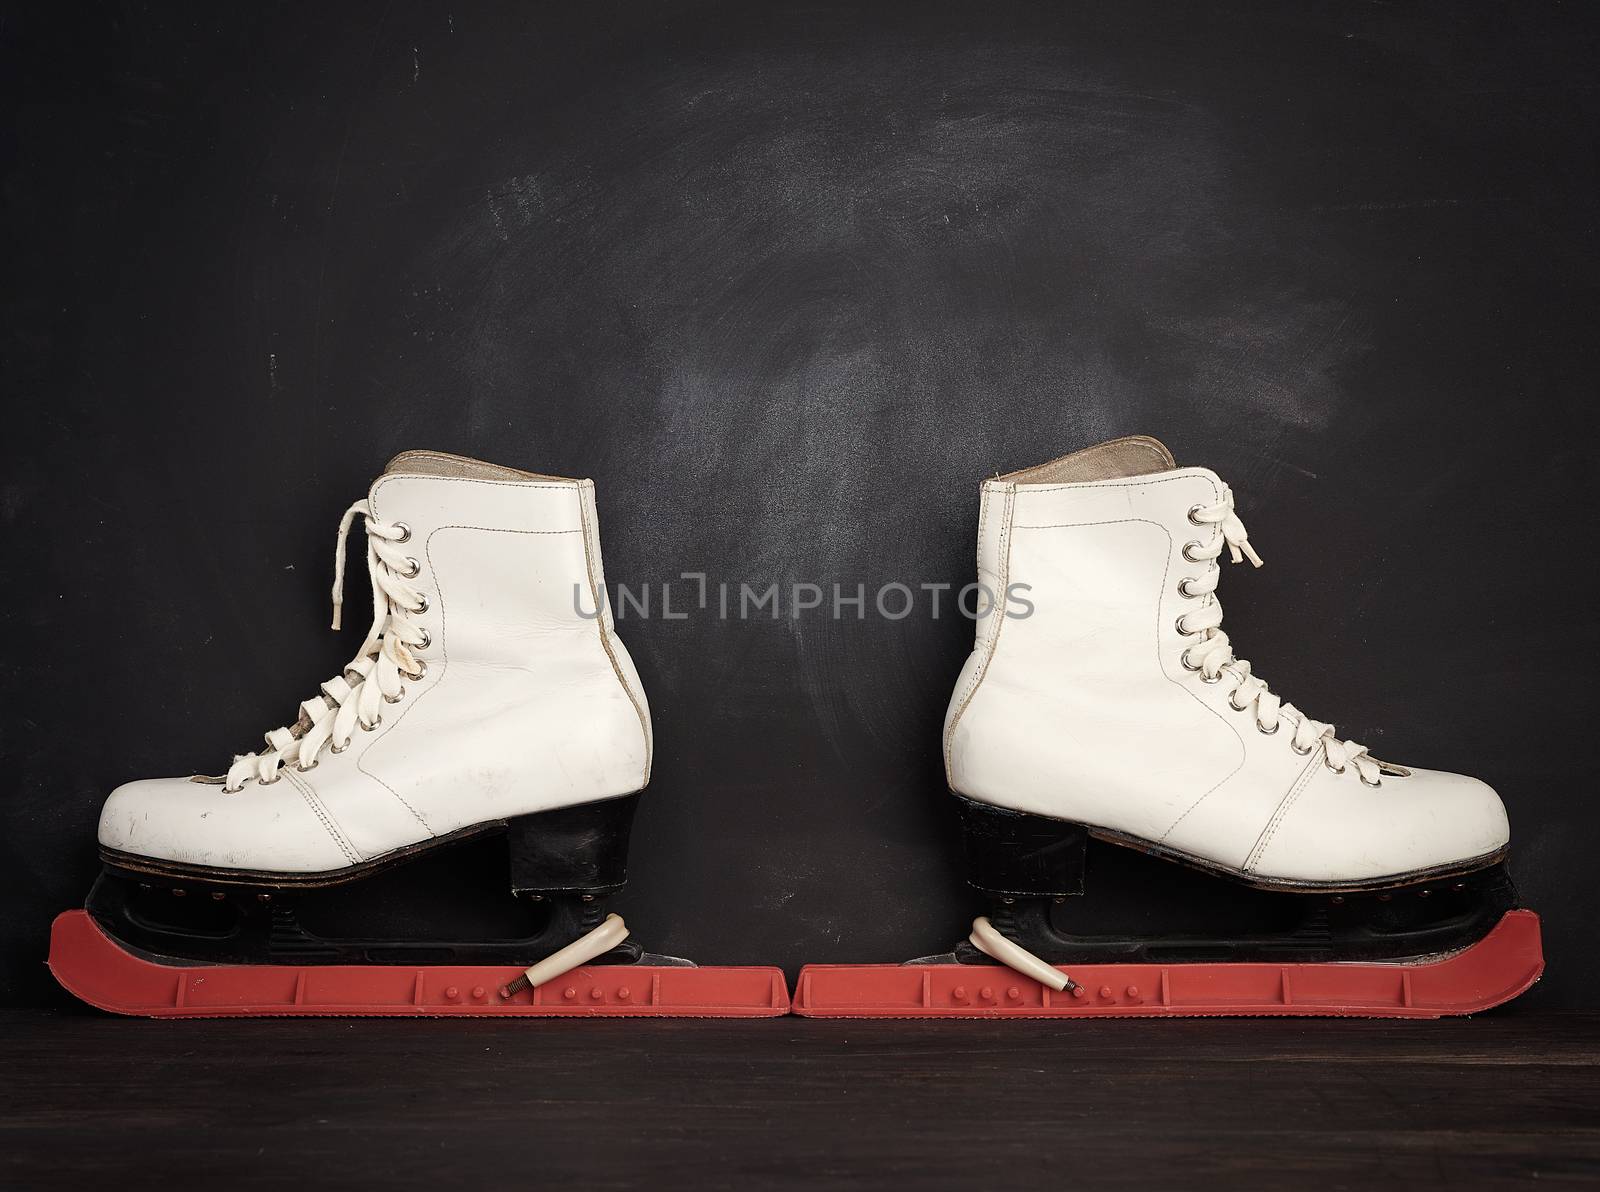 white leather skates for figure skating stand on a brown wooden background, sports equipment, copy space